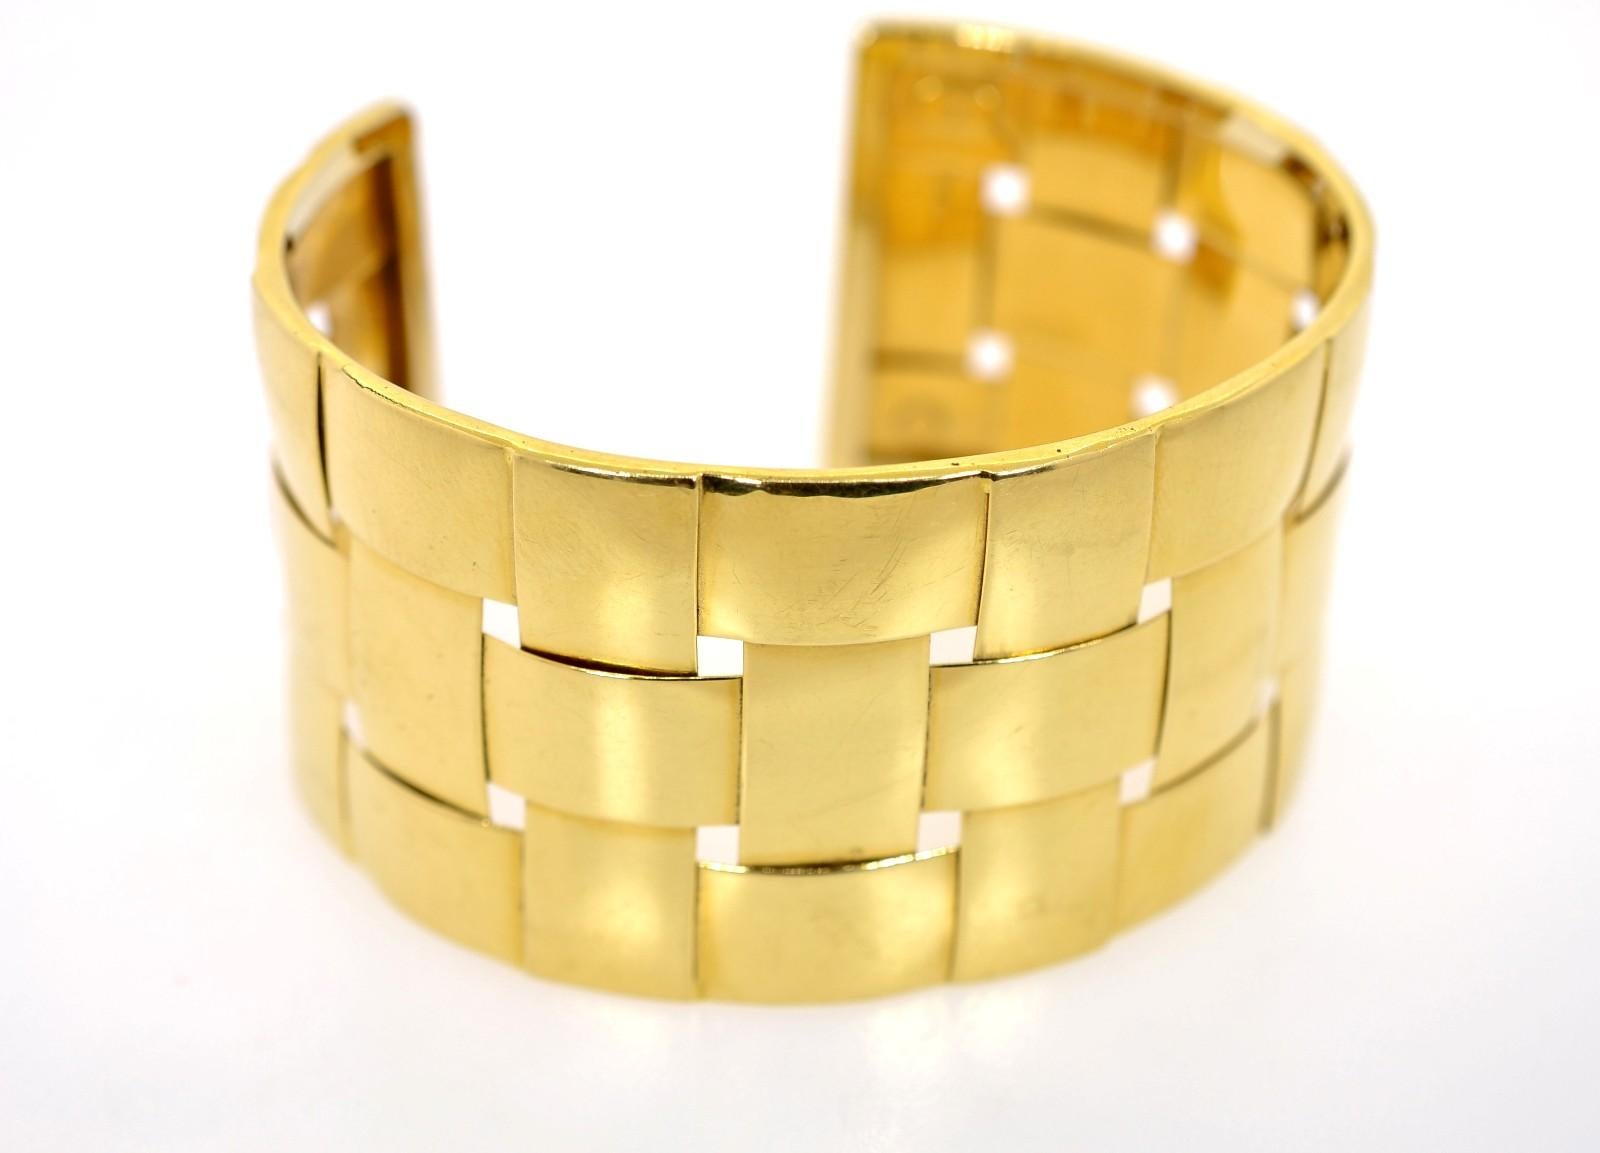 A high quality Italian creation from the 1970s, this wide 18KT yellow gold basket weave design bangle is a prime example of the elegance of simplicity. Measuring 1 3/8